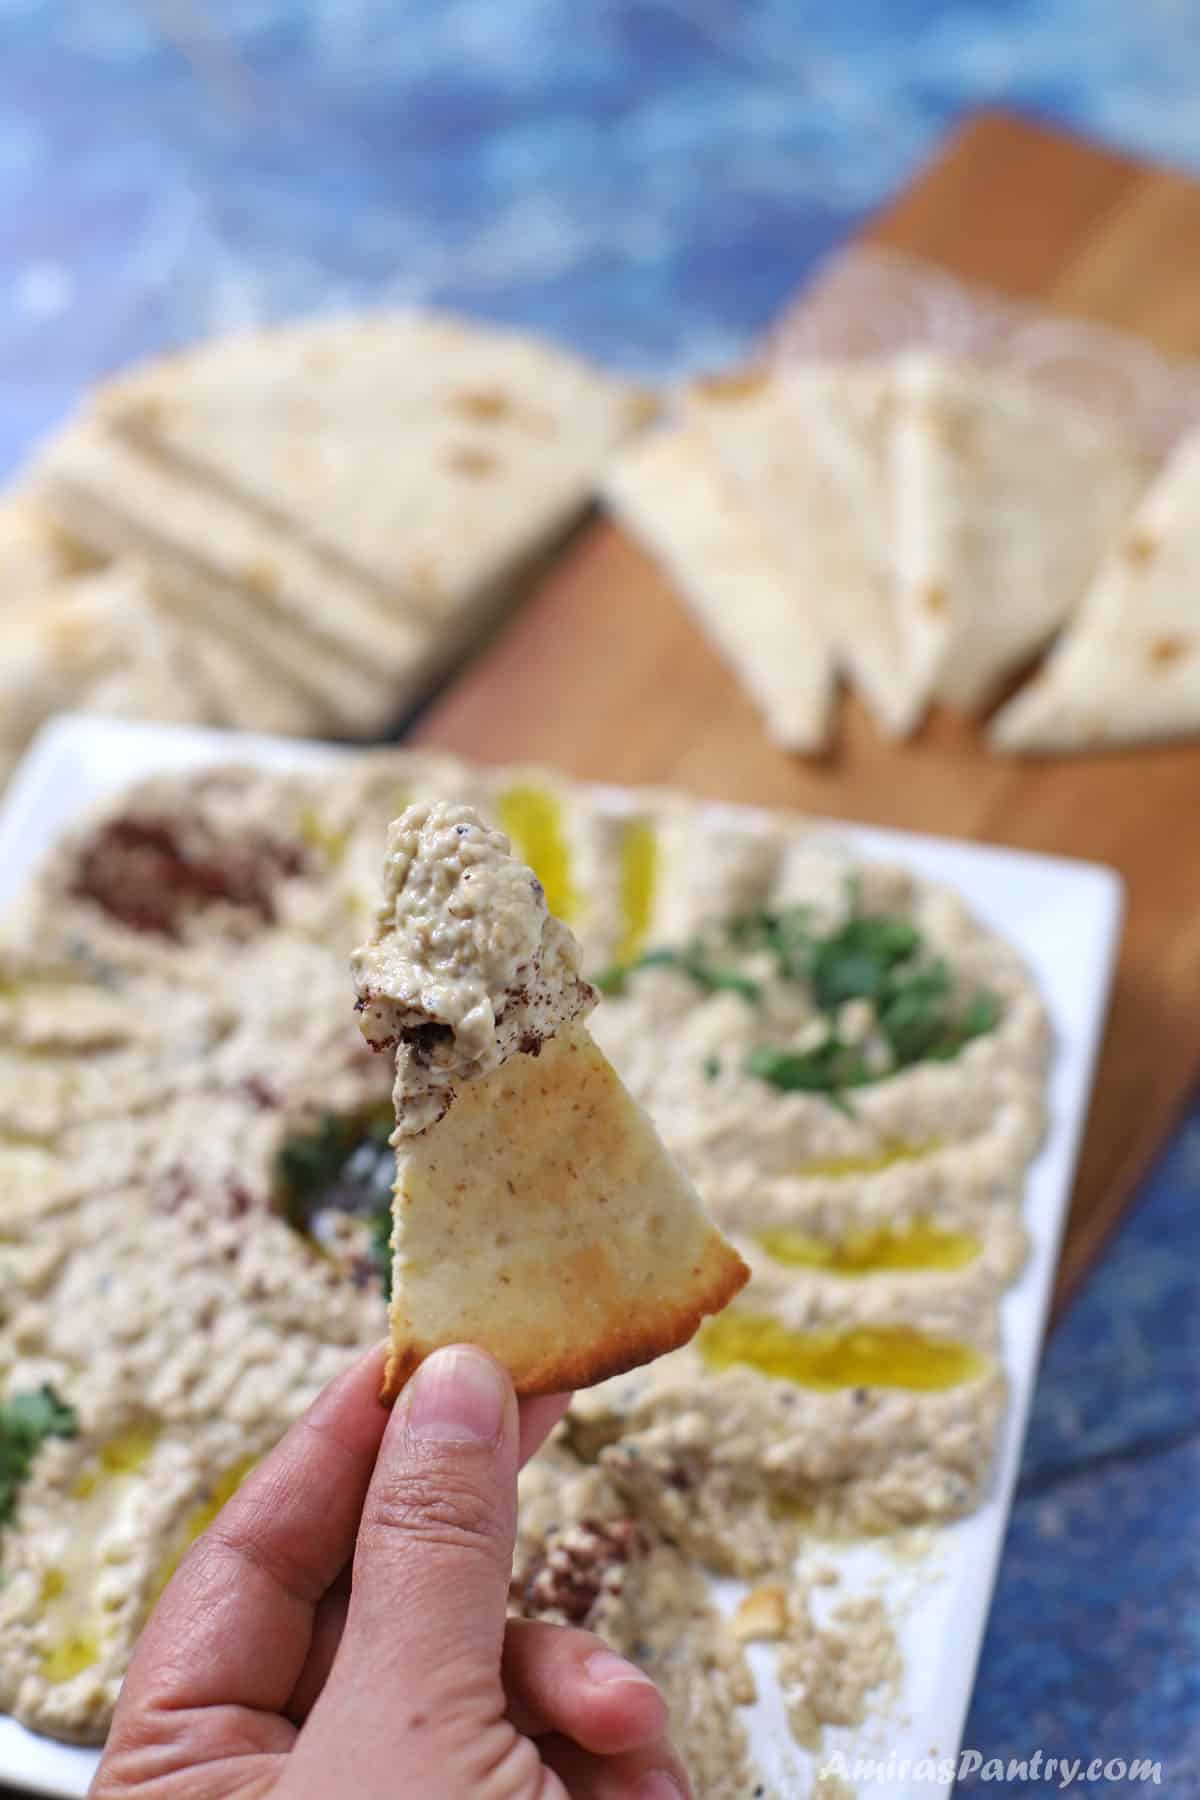 A hand holding a piece of pita wedge dipped in mutabbal.